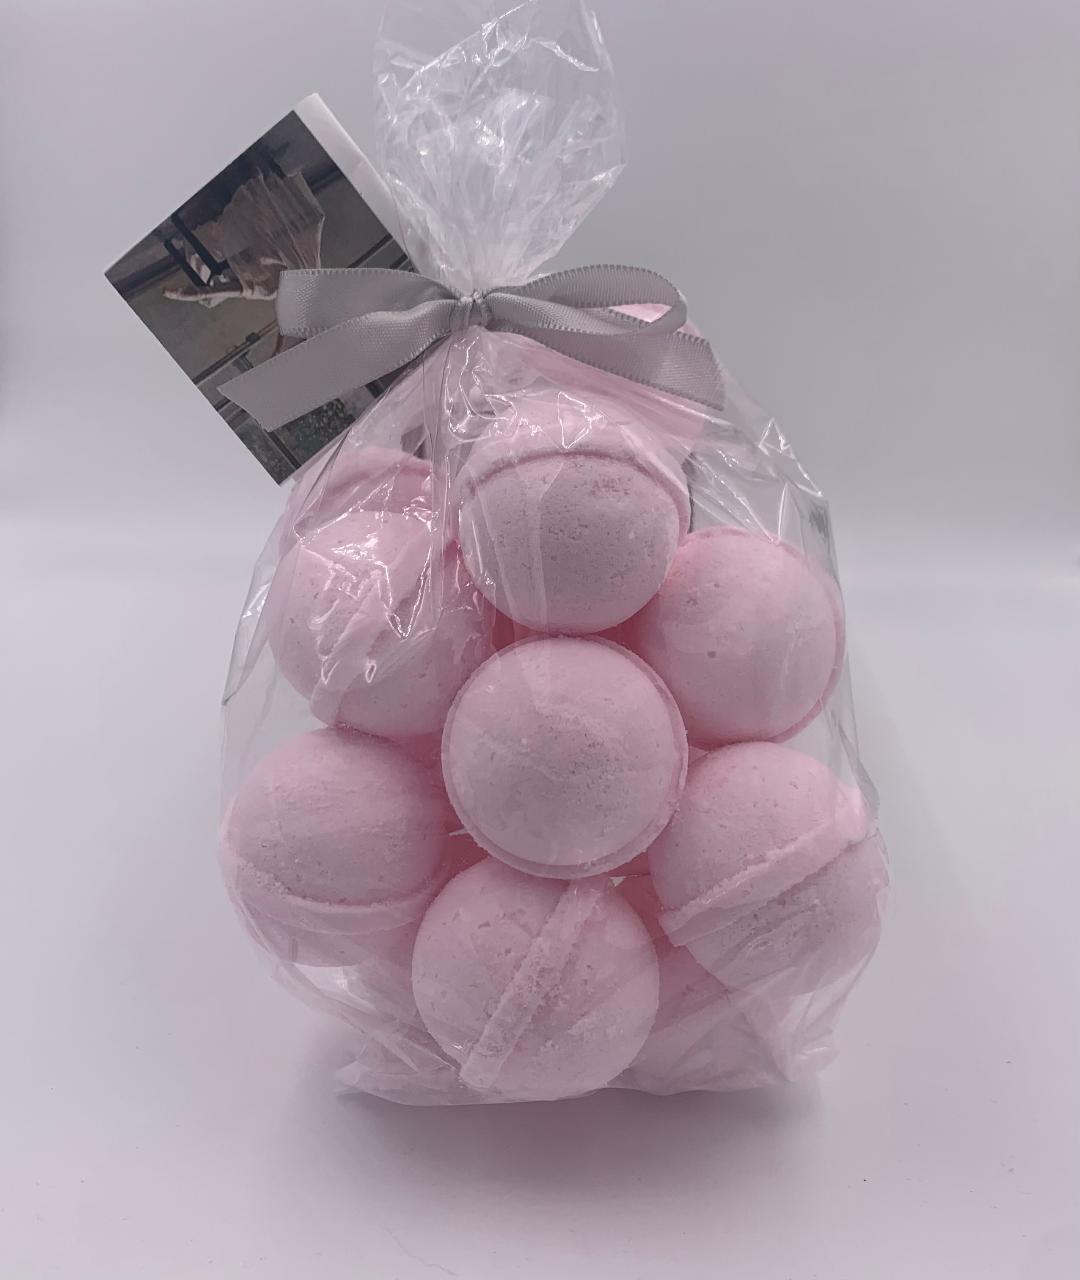 14 bath bombs Chanel No. 5 type bath fizzies, great for dry skin, shea